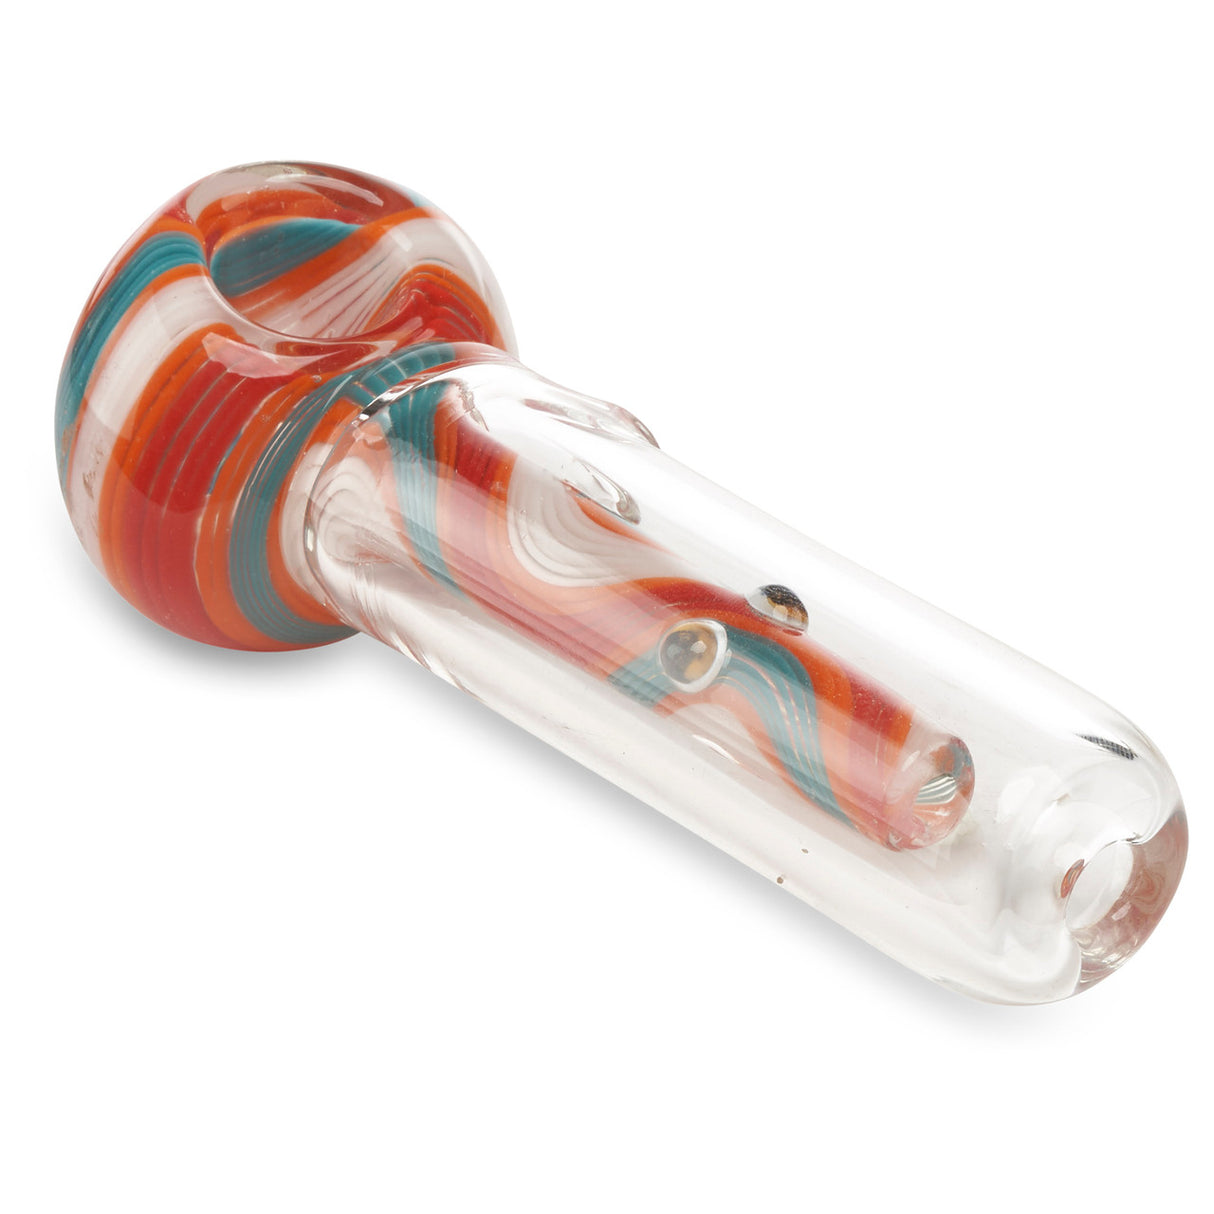 Pioneer trapped in a tube hand pipe spoon dry herb bowl for sale online